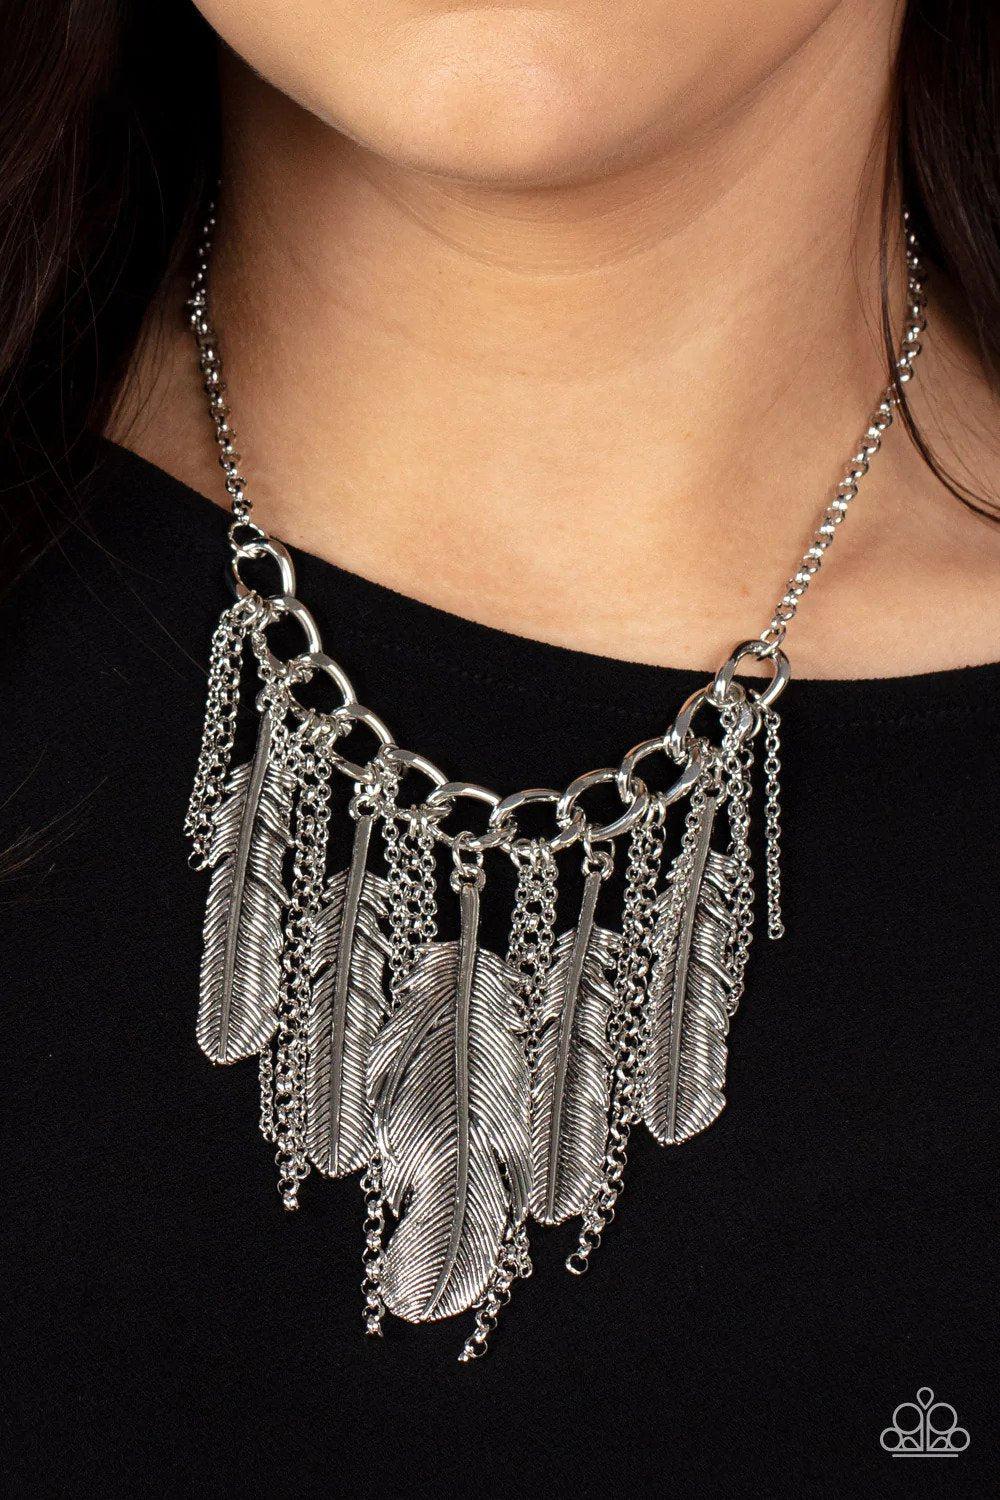 NEST Friends Forever Silver Feather Necklace - Paparazzi Accessories- on model - CarasShop.com - $5 Jewelry by Cara Jewels